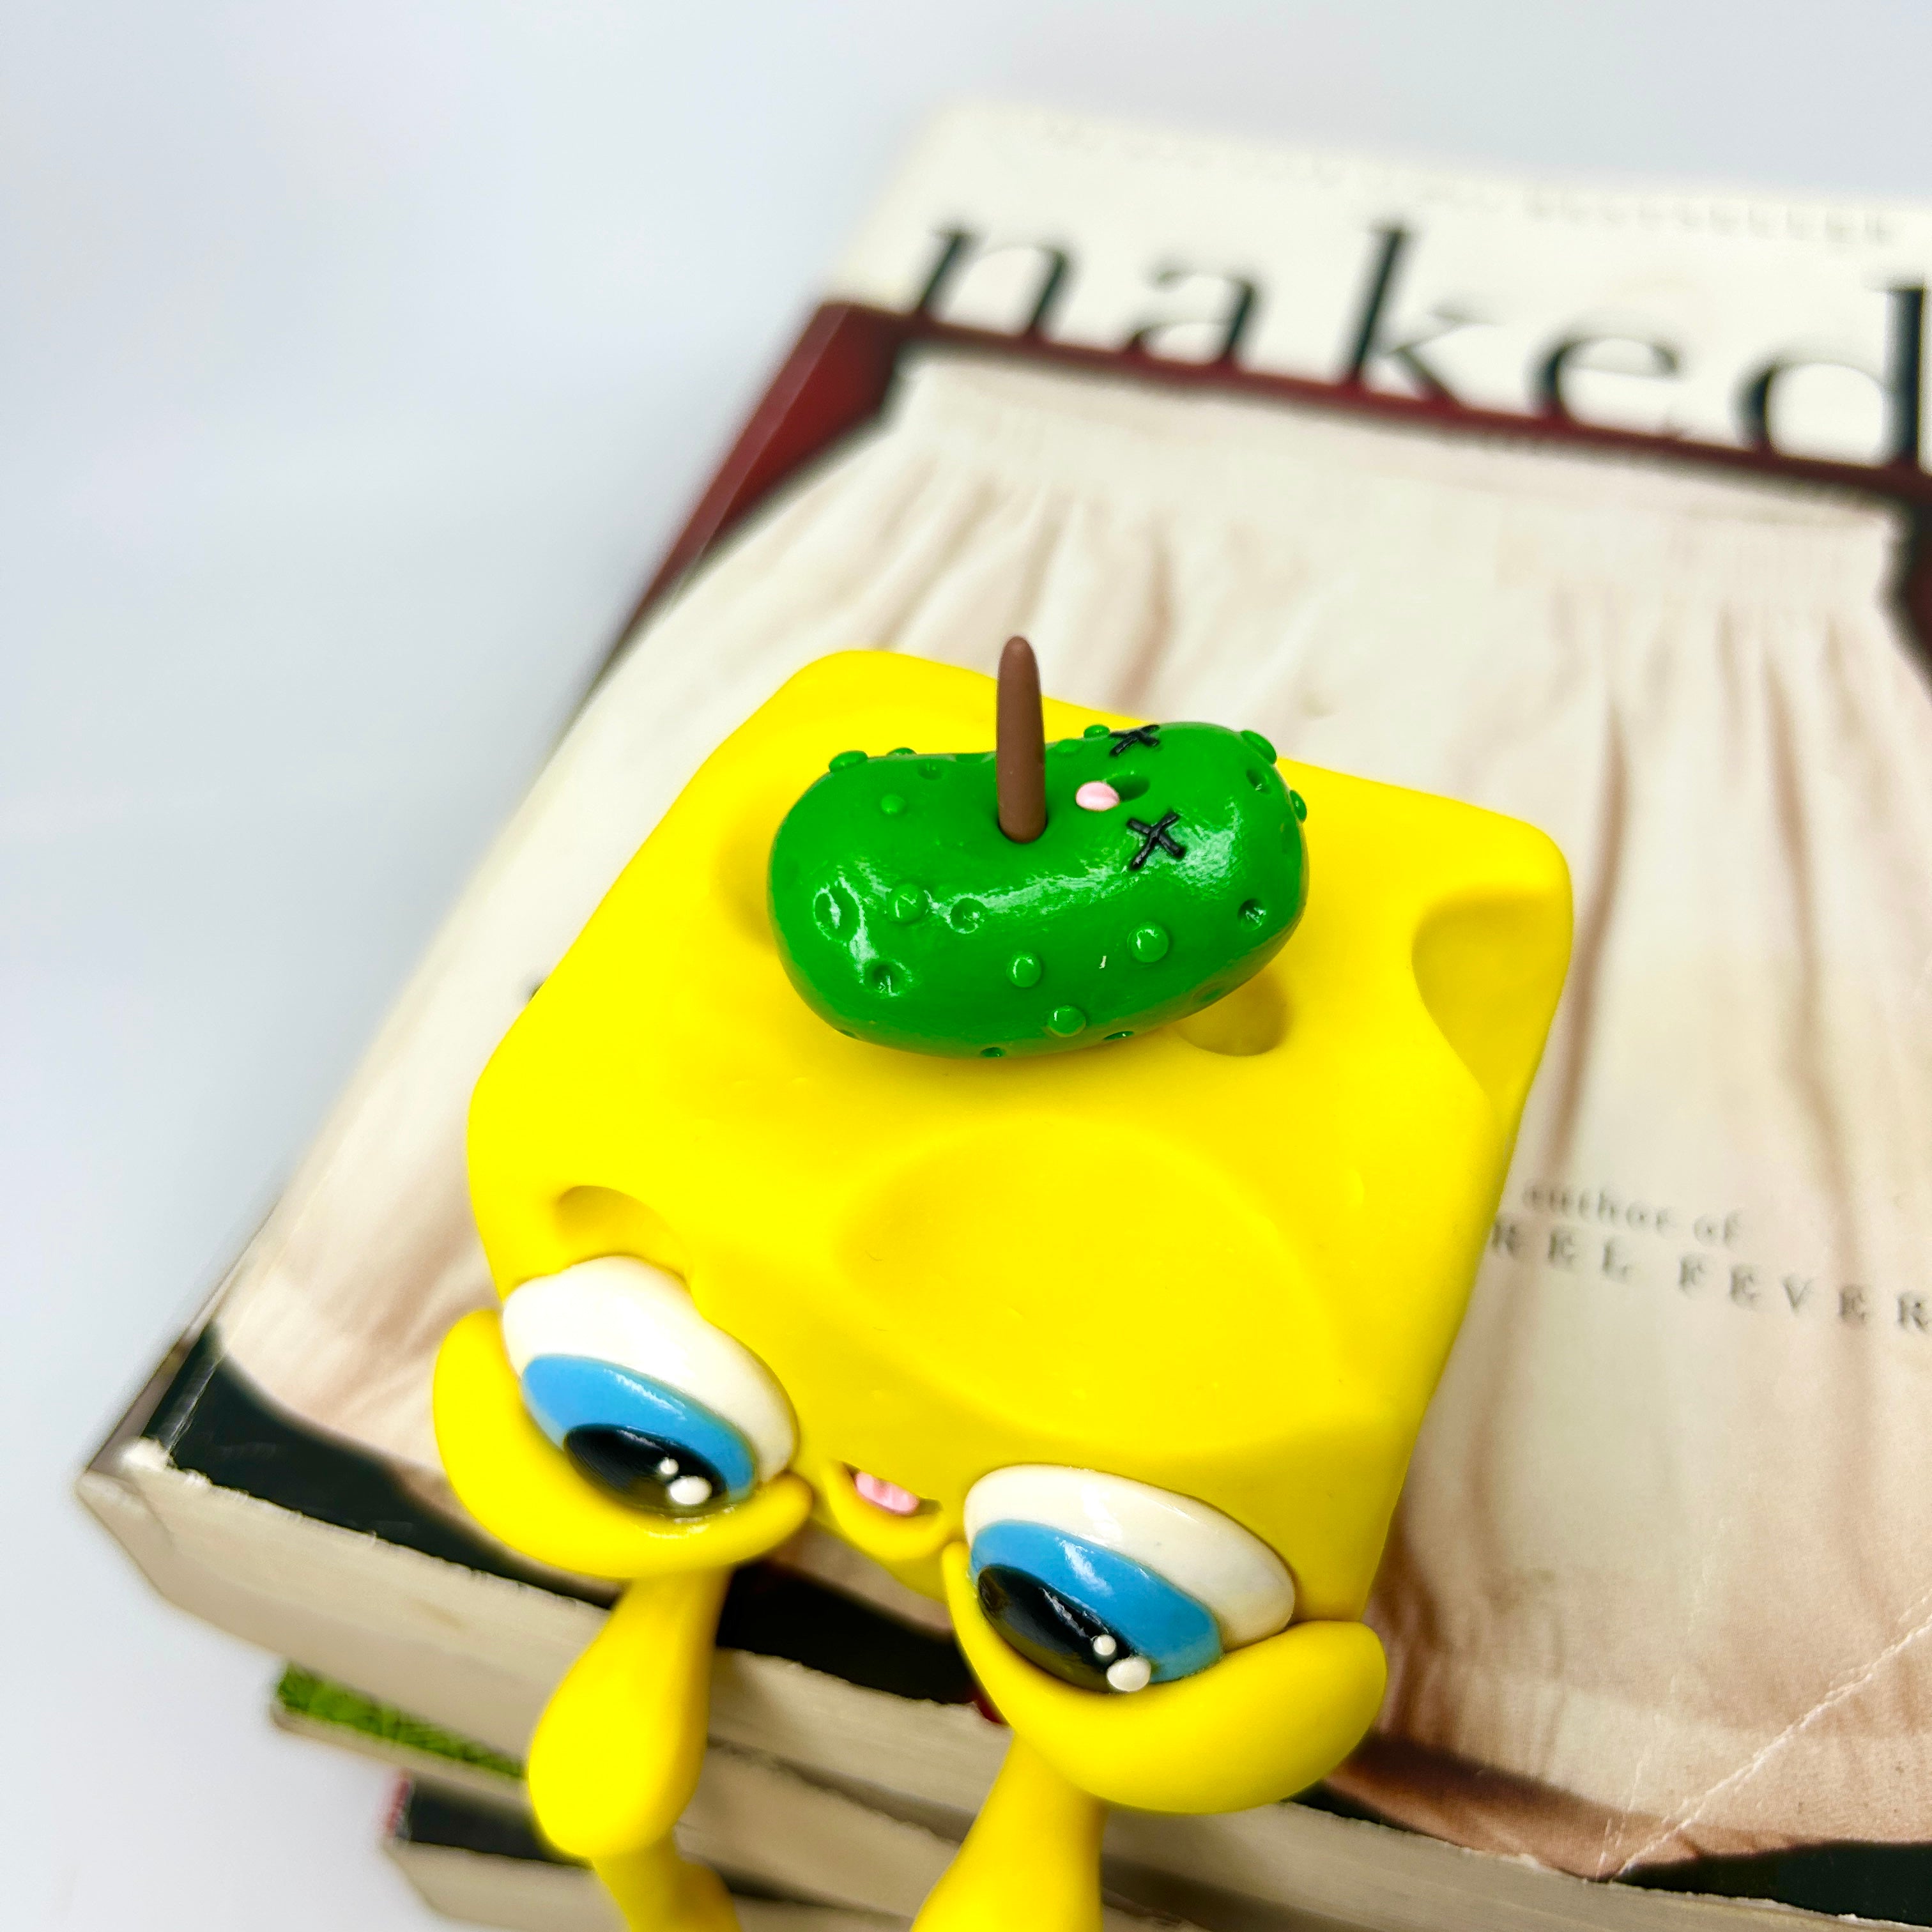 Toy cheese block with green pickle on books, close-ups of candy and toy eye from Simon Says Macy & Friends collection.